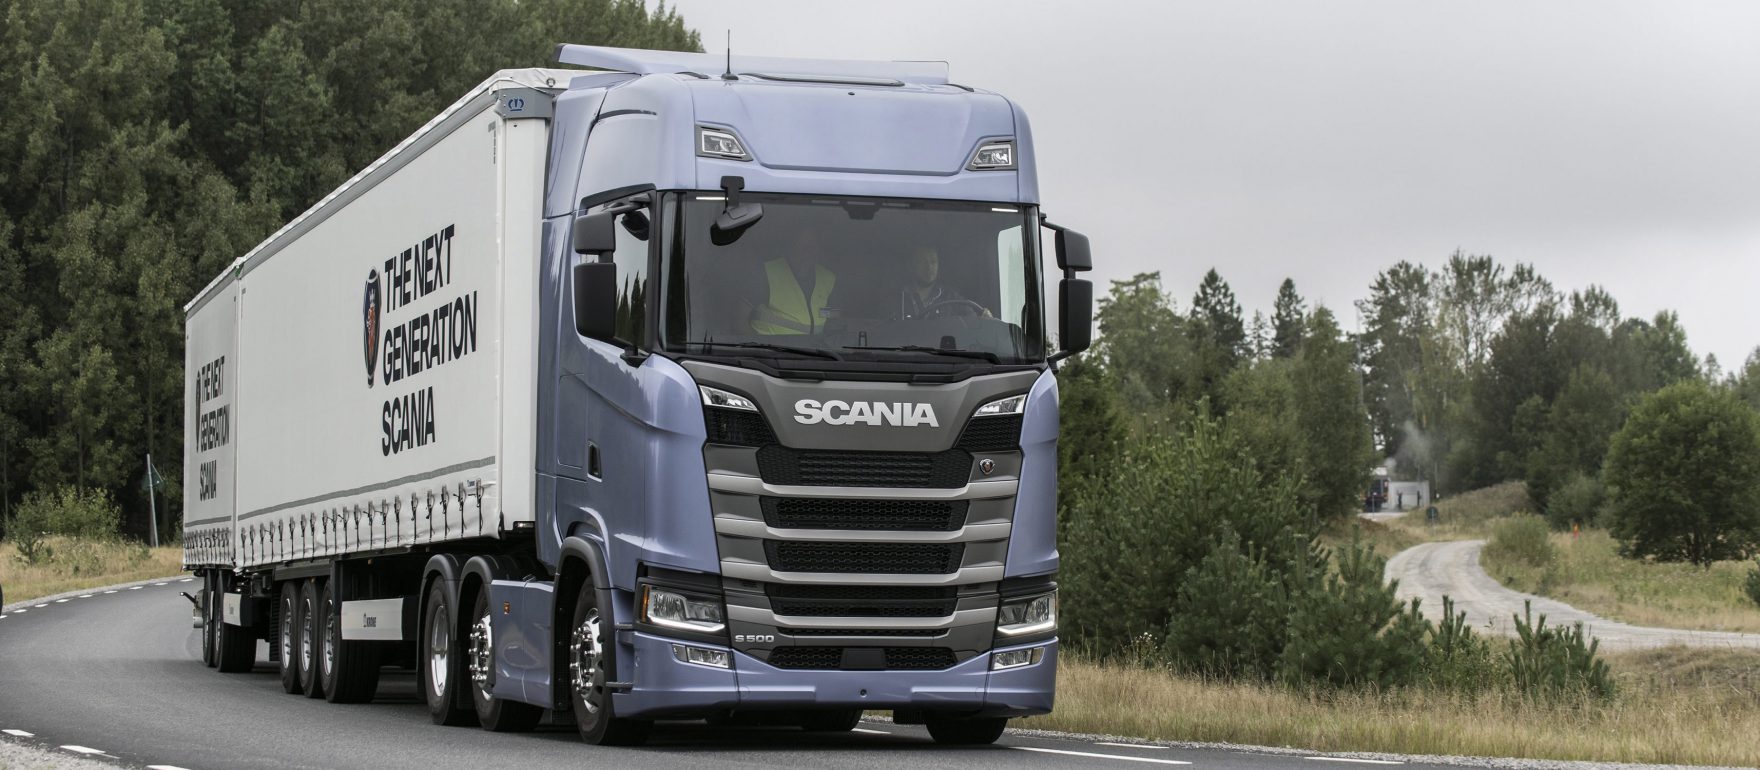 Scania's New Truck Generation - Scania , HD Wallpaper & Backgrounds